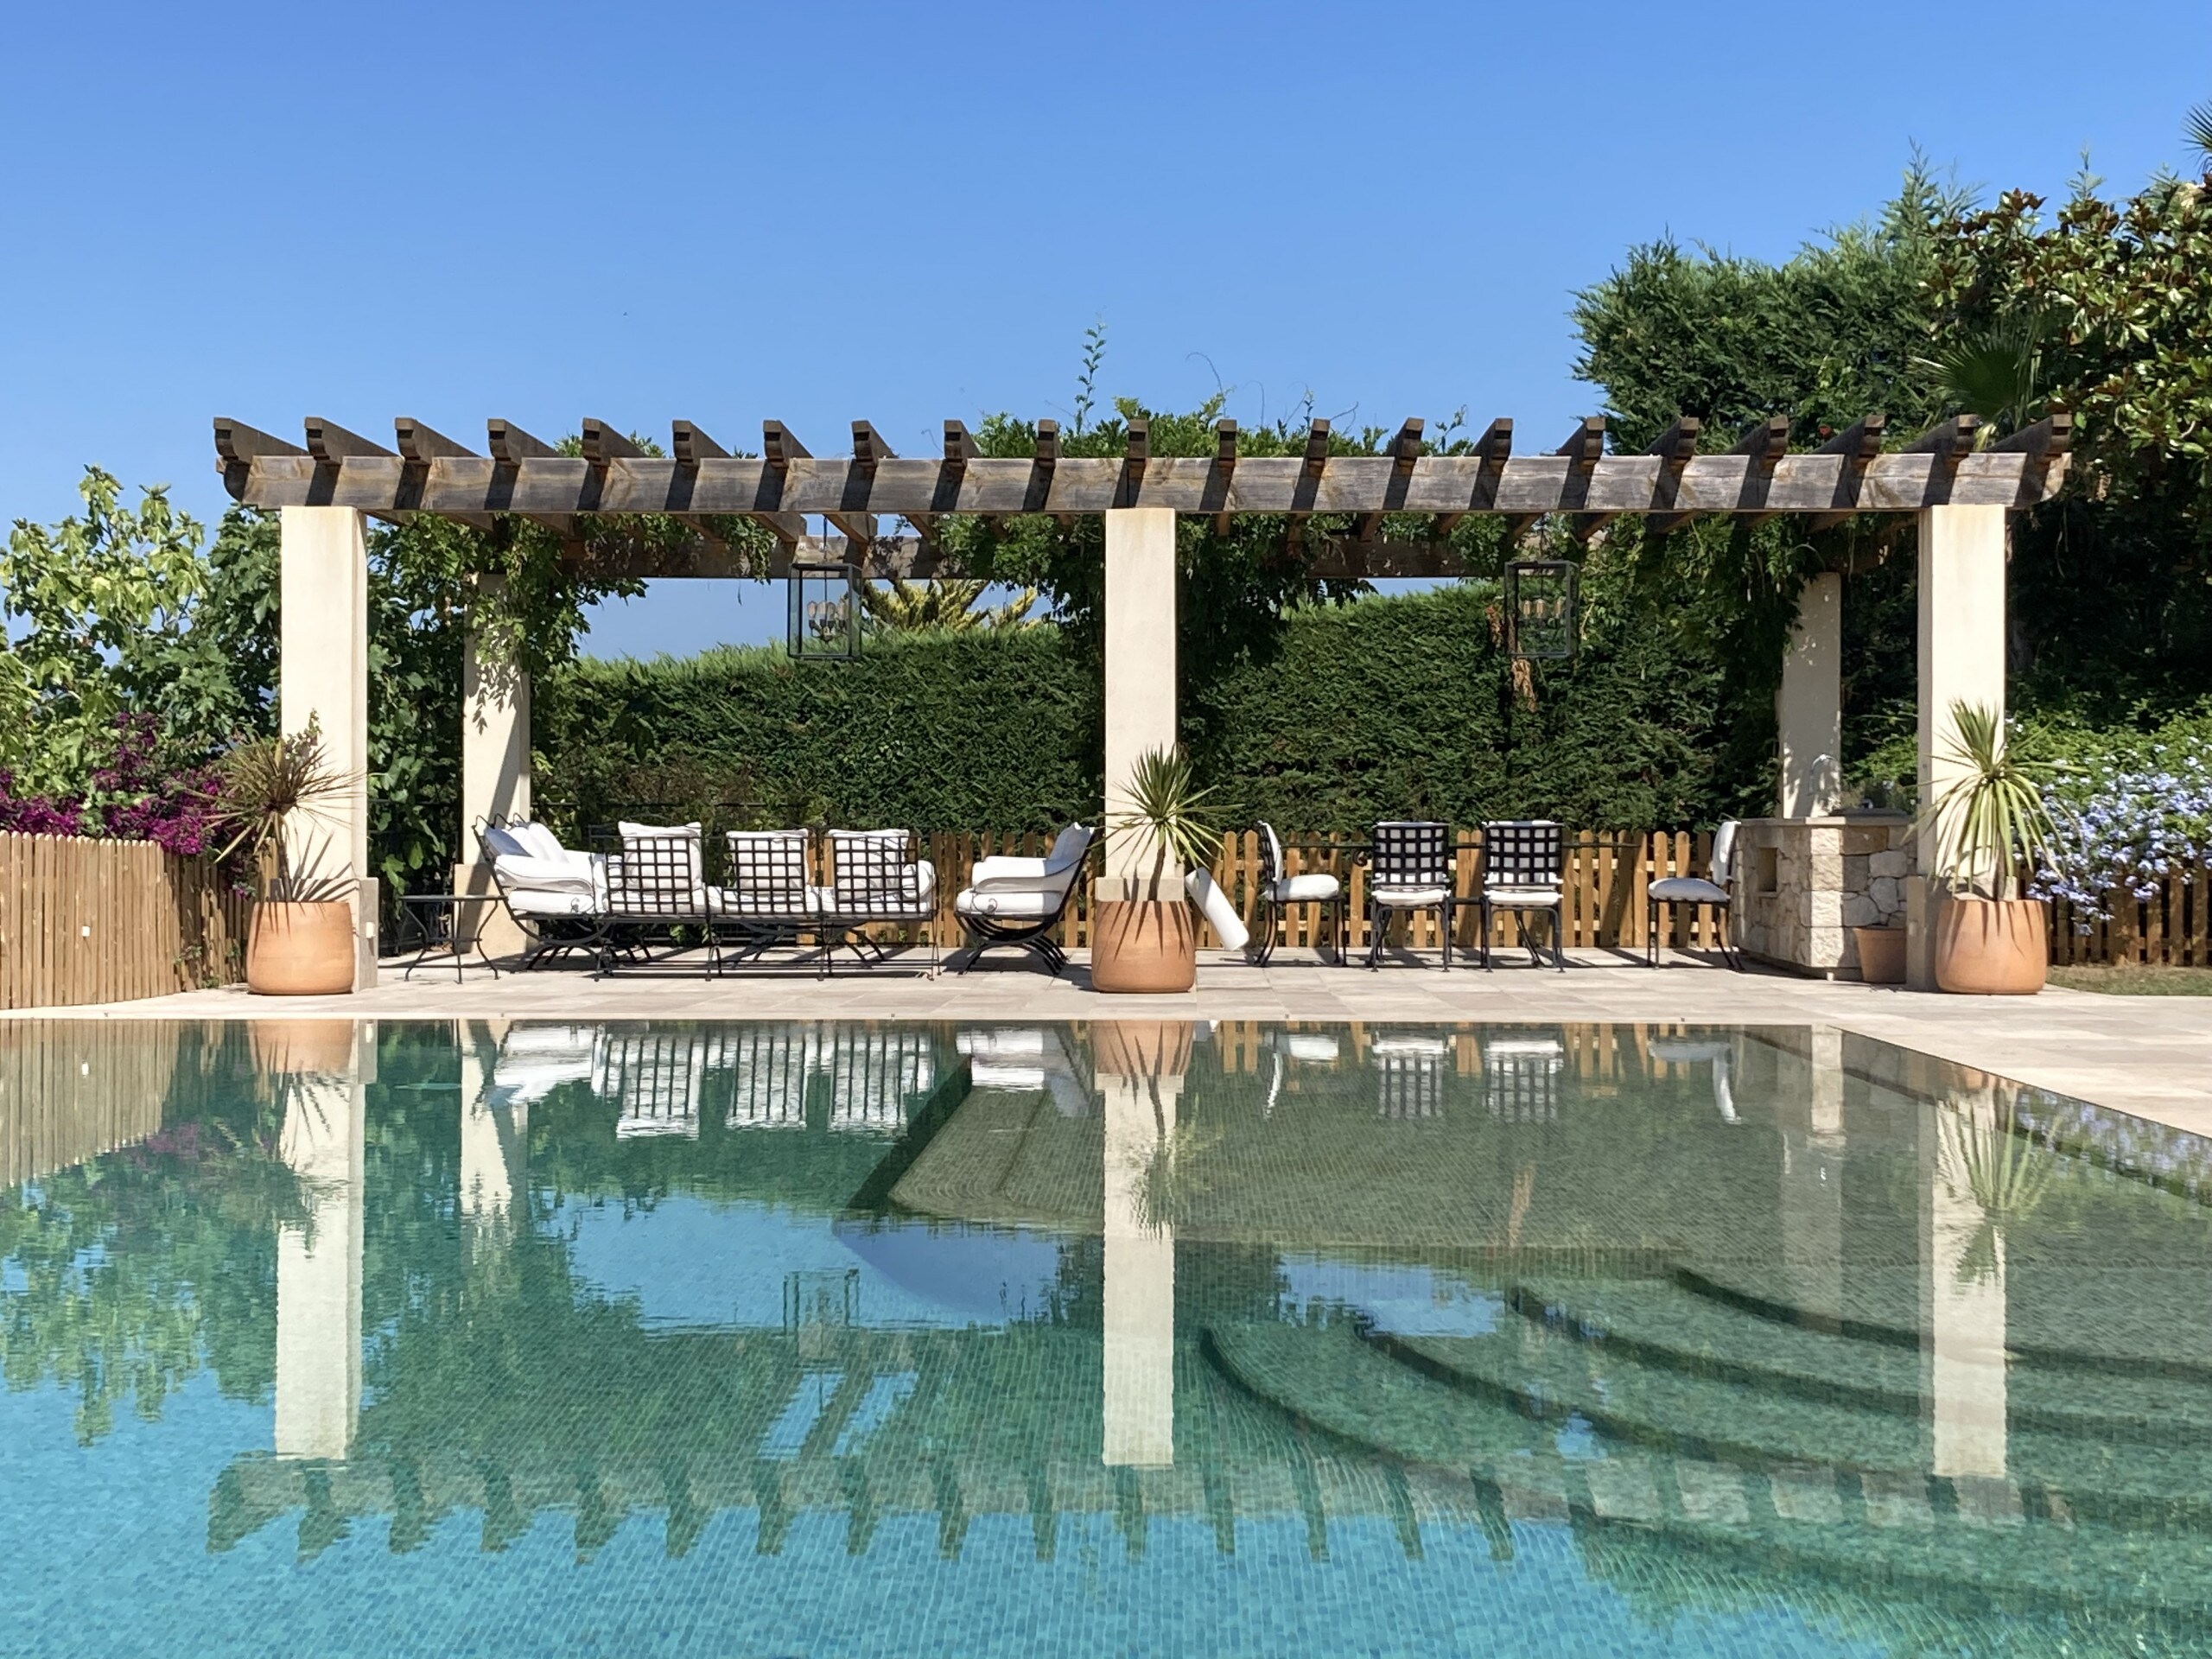 Property Image 2 - Luxurious 6 bedroom villa in Valbonne, perfect for the discerning traveller